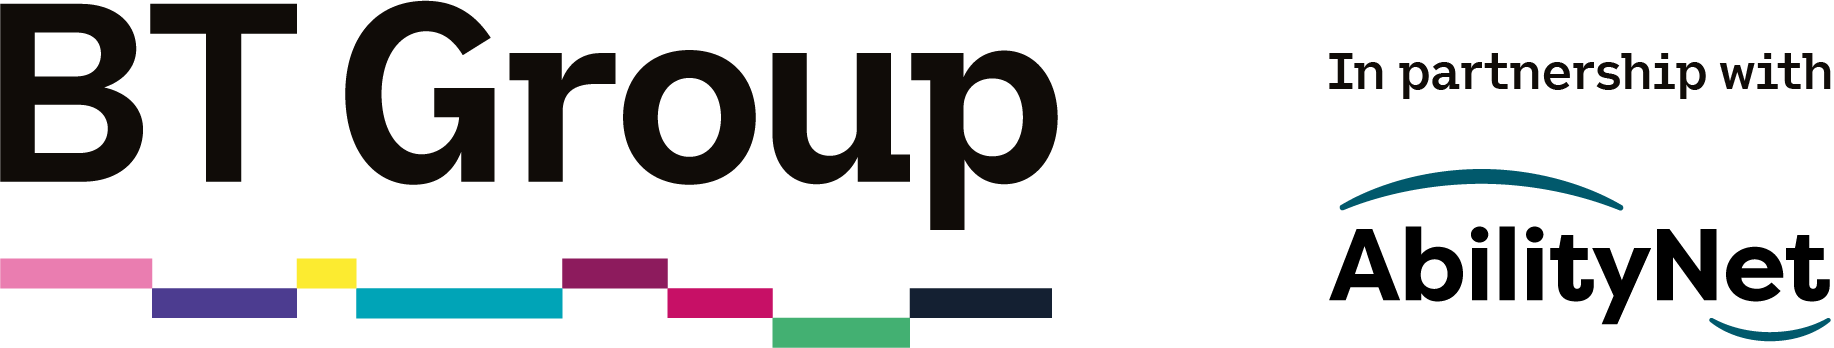 BT Group in partnership with AbilityNet logo